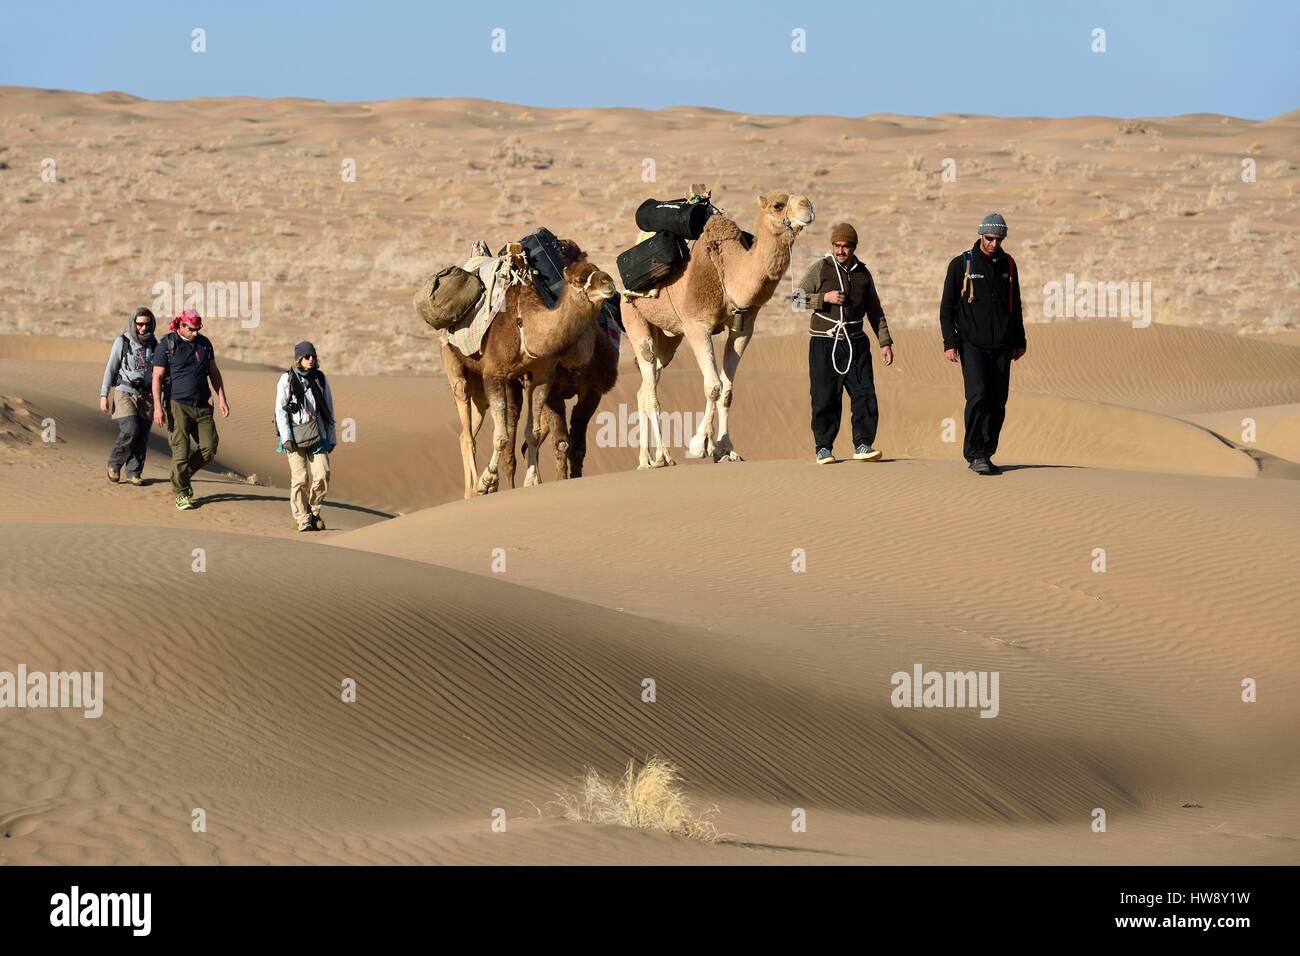 Iran, Isfahan province, Dasht-e Kavir desert, Mesr in Khur and Biabanak County, camel train in the dunes of the place called Kuh-e Sefid in a camel trek Stock Photo